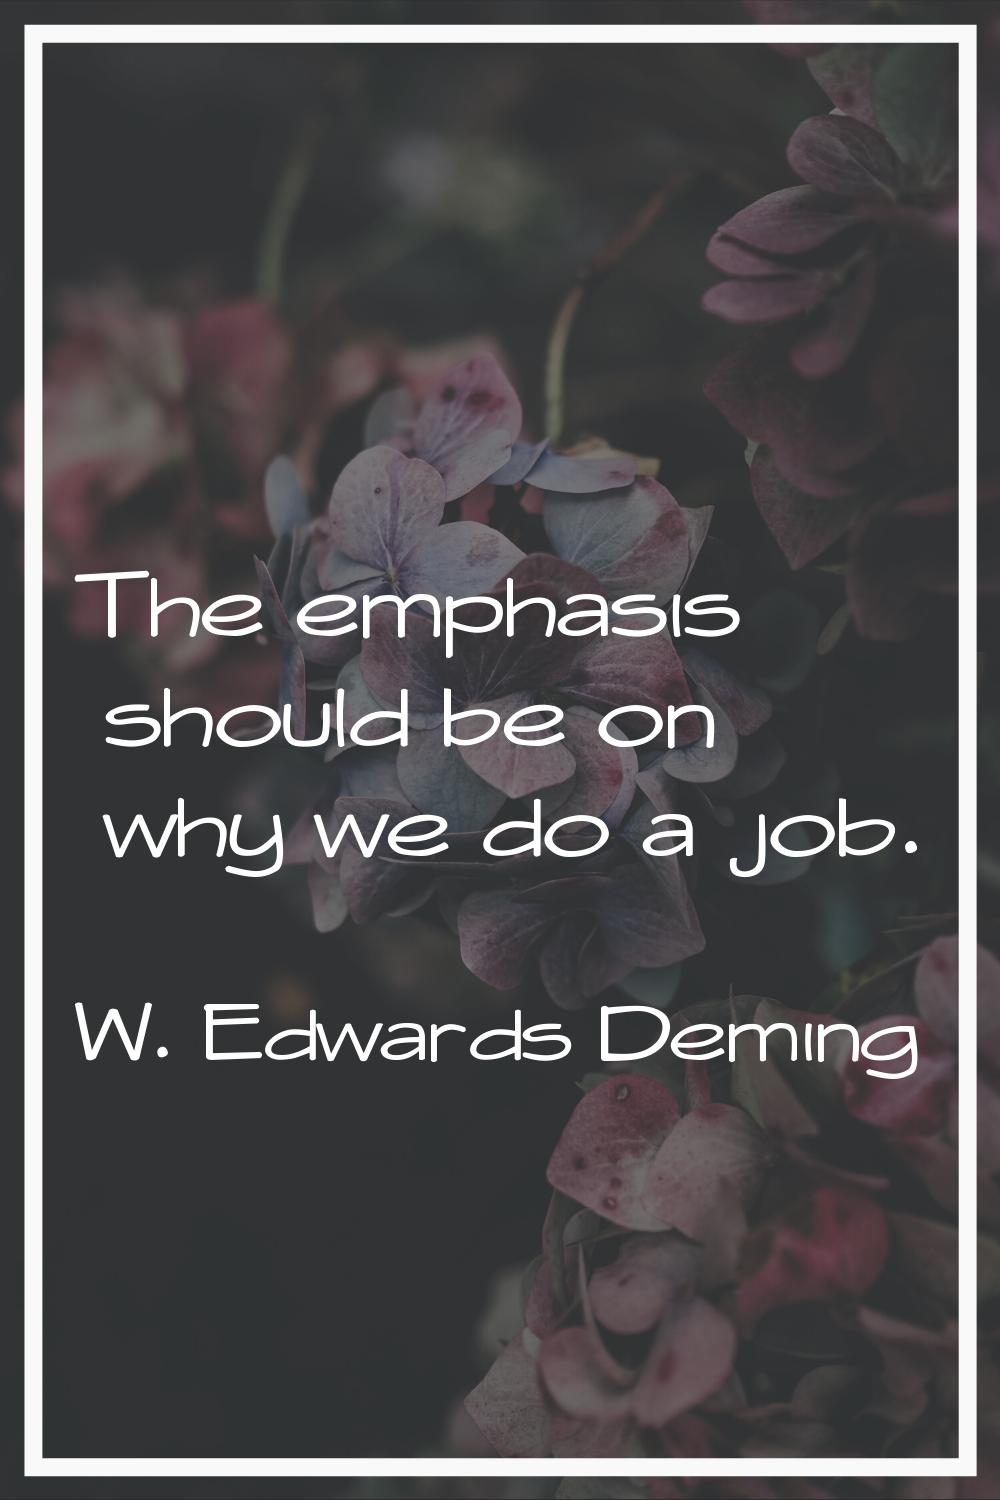 The emphasis should be on why we do a job.